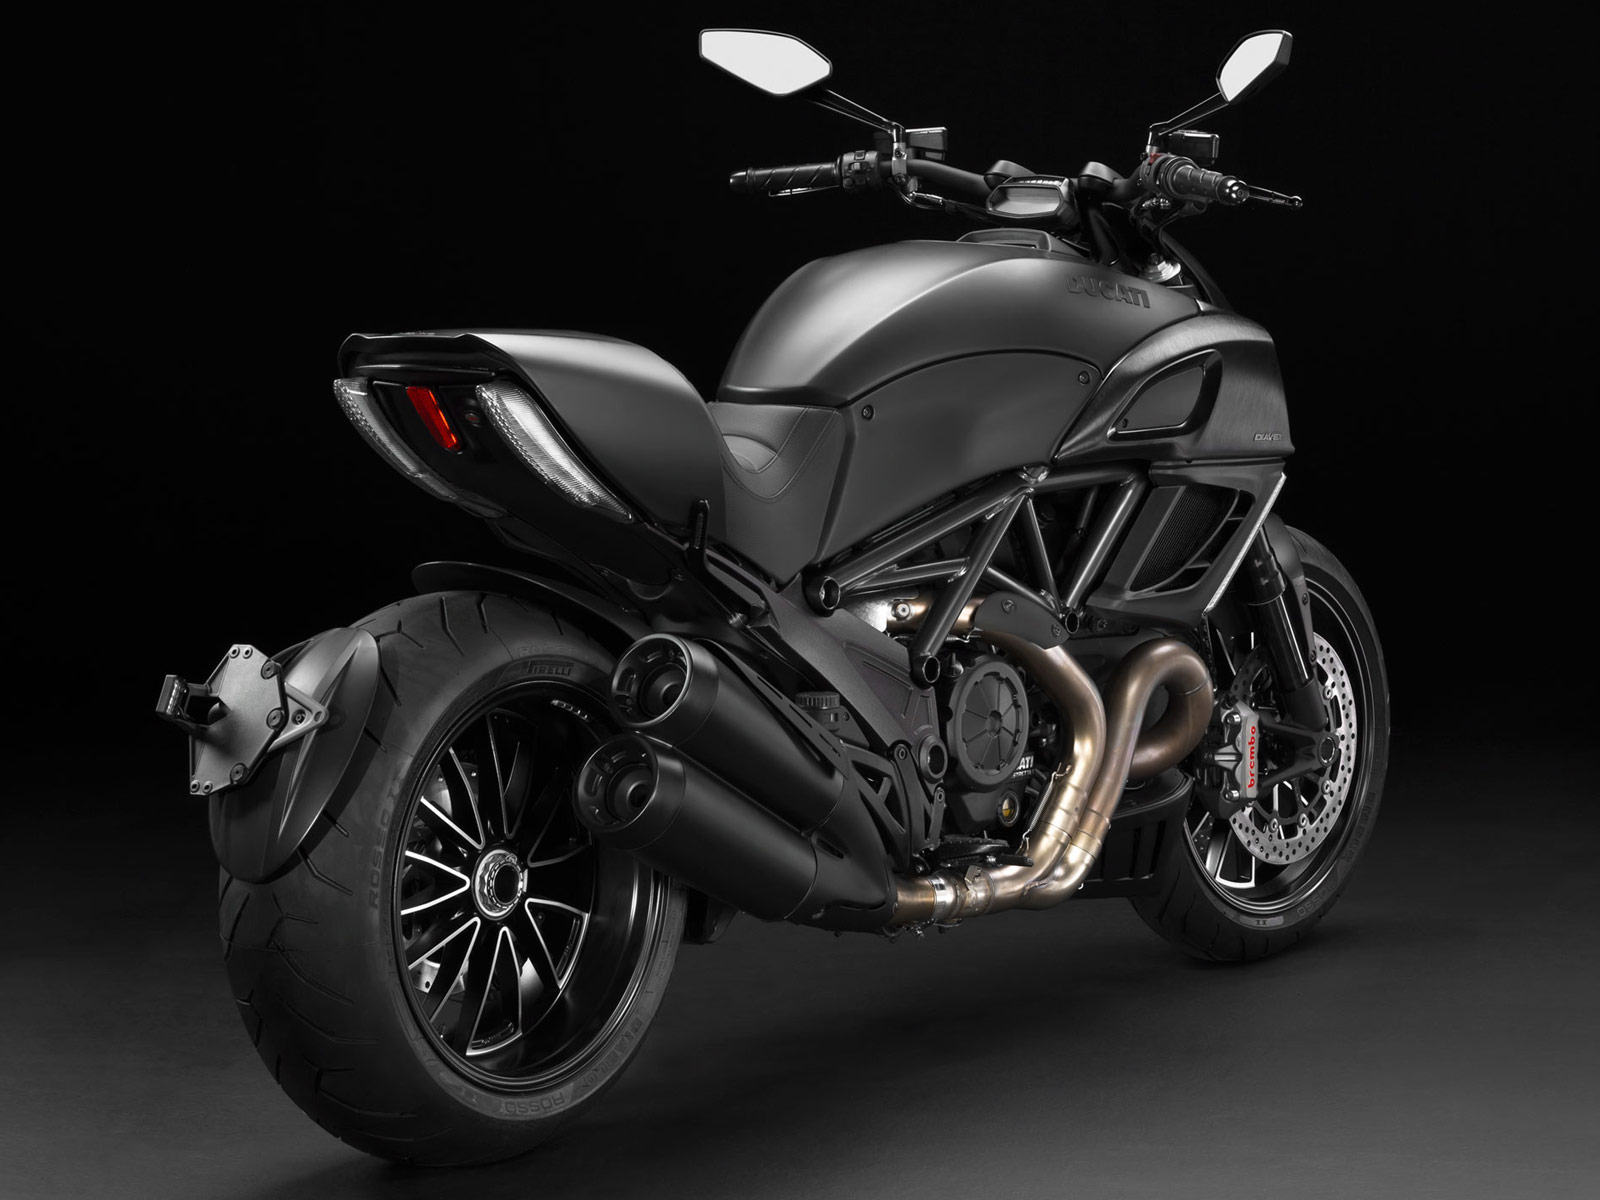 2013 Ducati Diavel DarkST 1300 photos and specifications